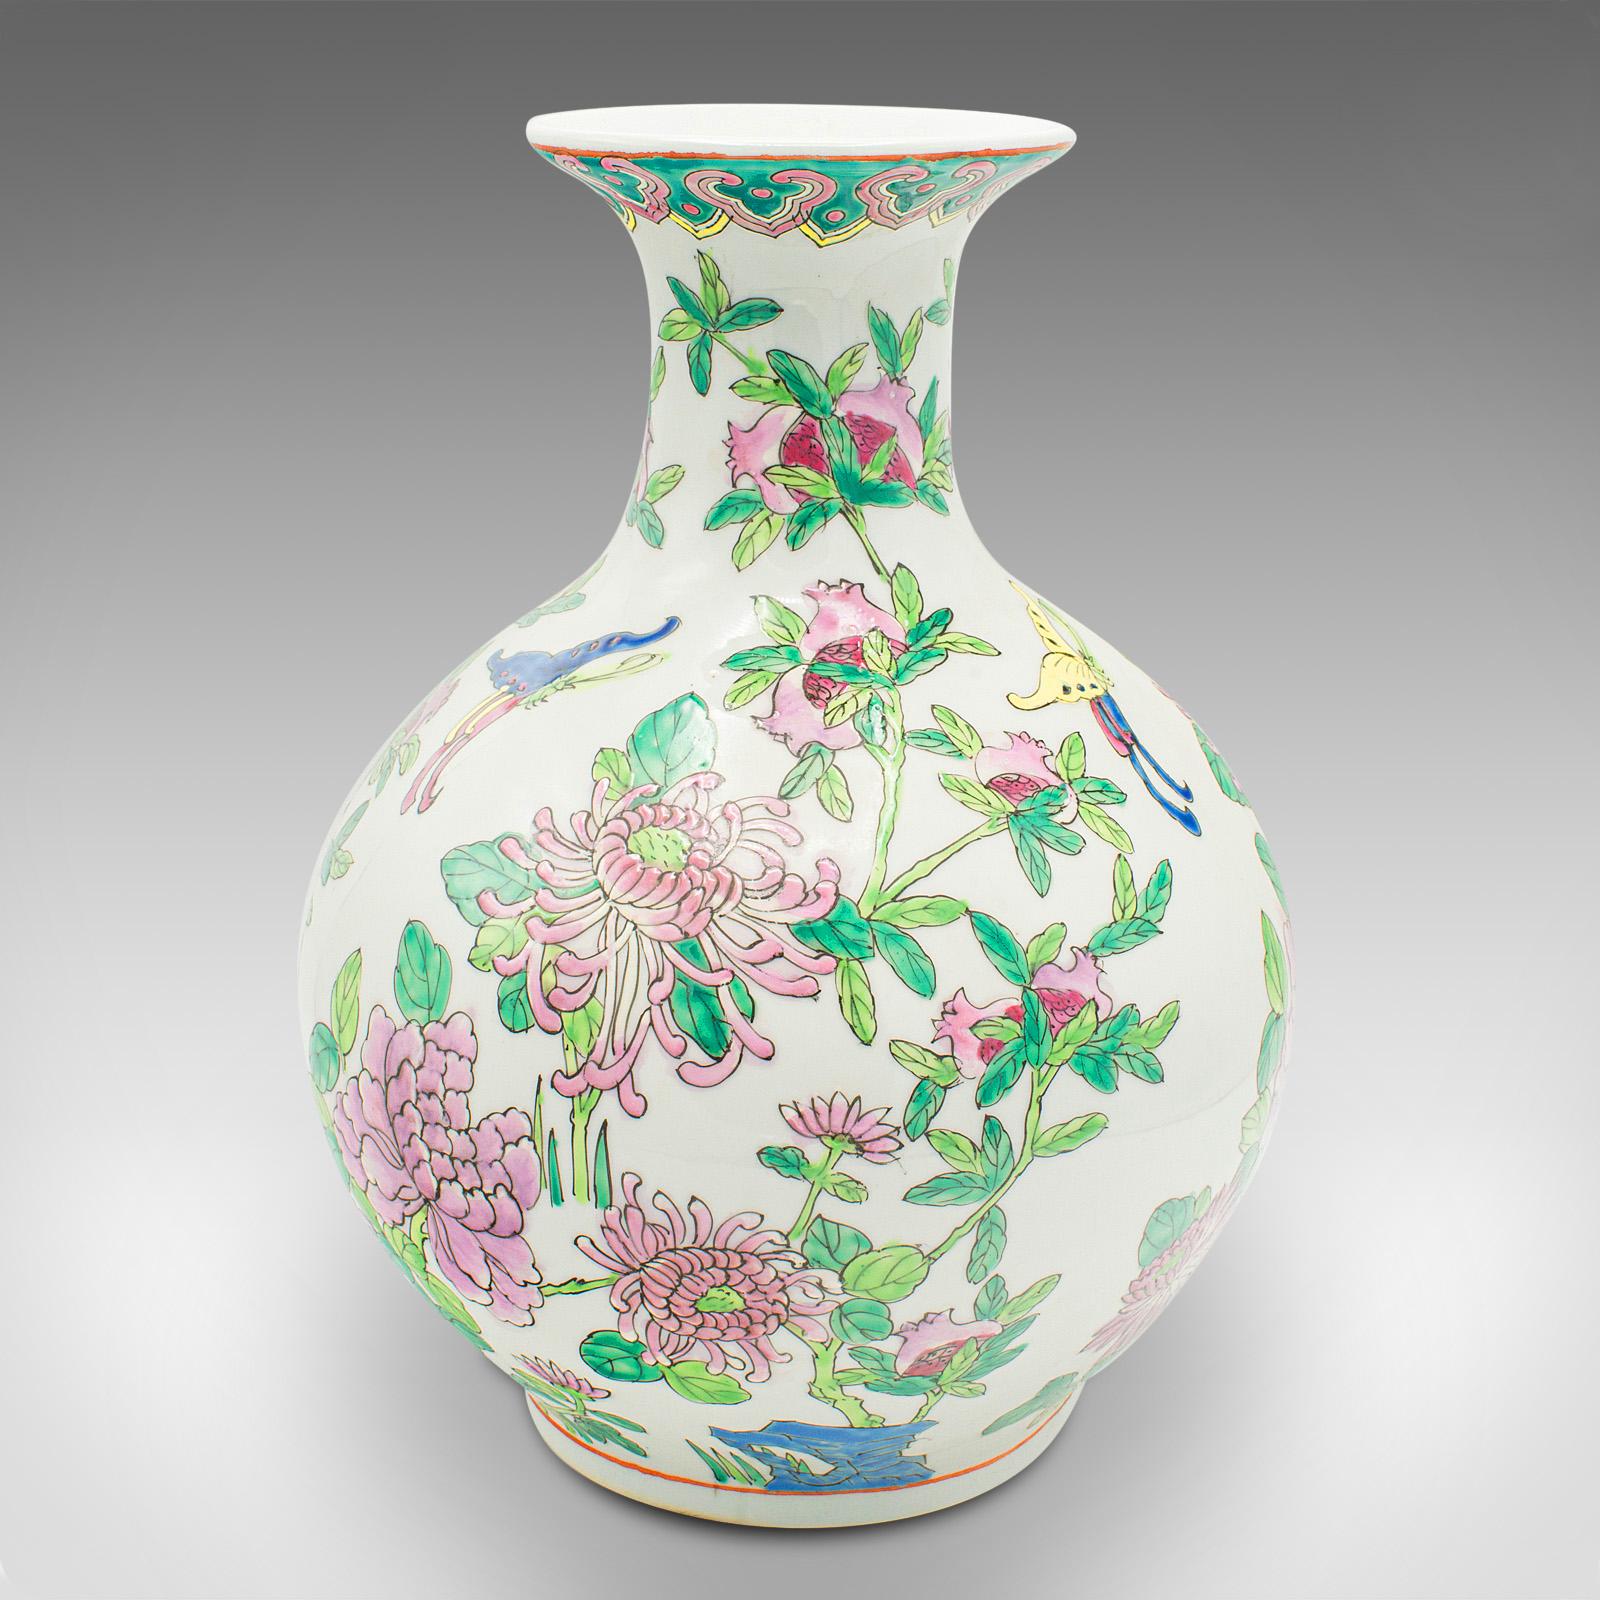 This is a vintage Oriental baluster vase. A Chinese, ceramic flower urn with polychrome enamel finish, dating to the late Art Deco period, circa 1940.

Superb dragon decor with a cast of charming figures
Displaying a desirable aged patina and in